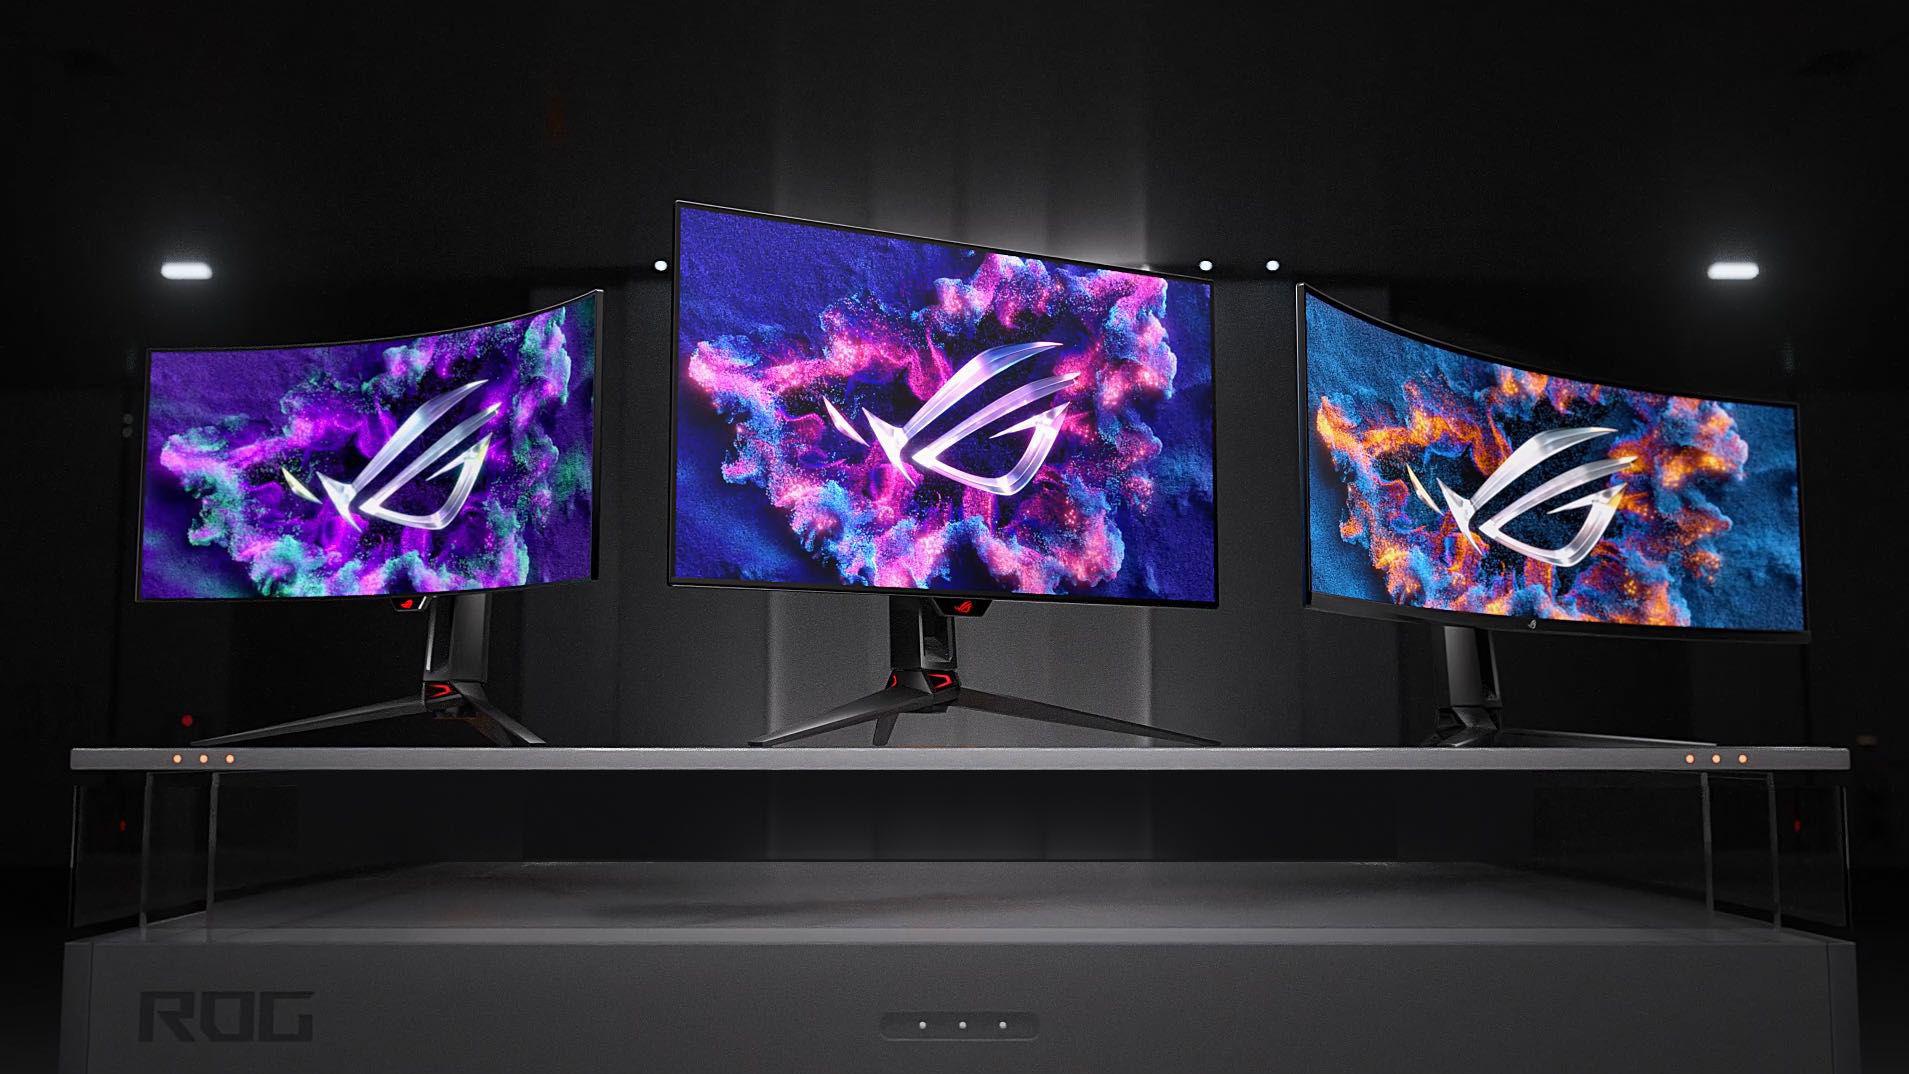 Asus, new monitors and ROG motherboards at Gamescom - Pledge Times